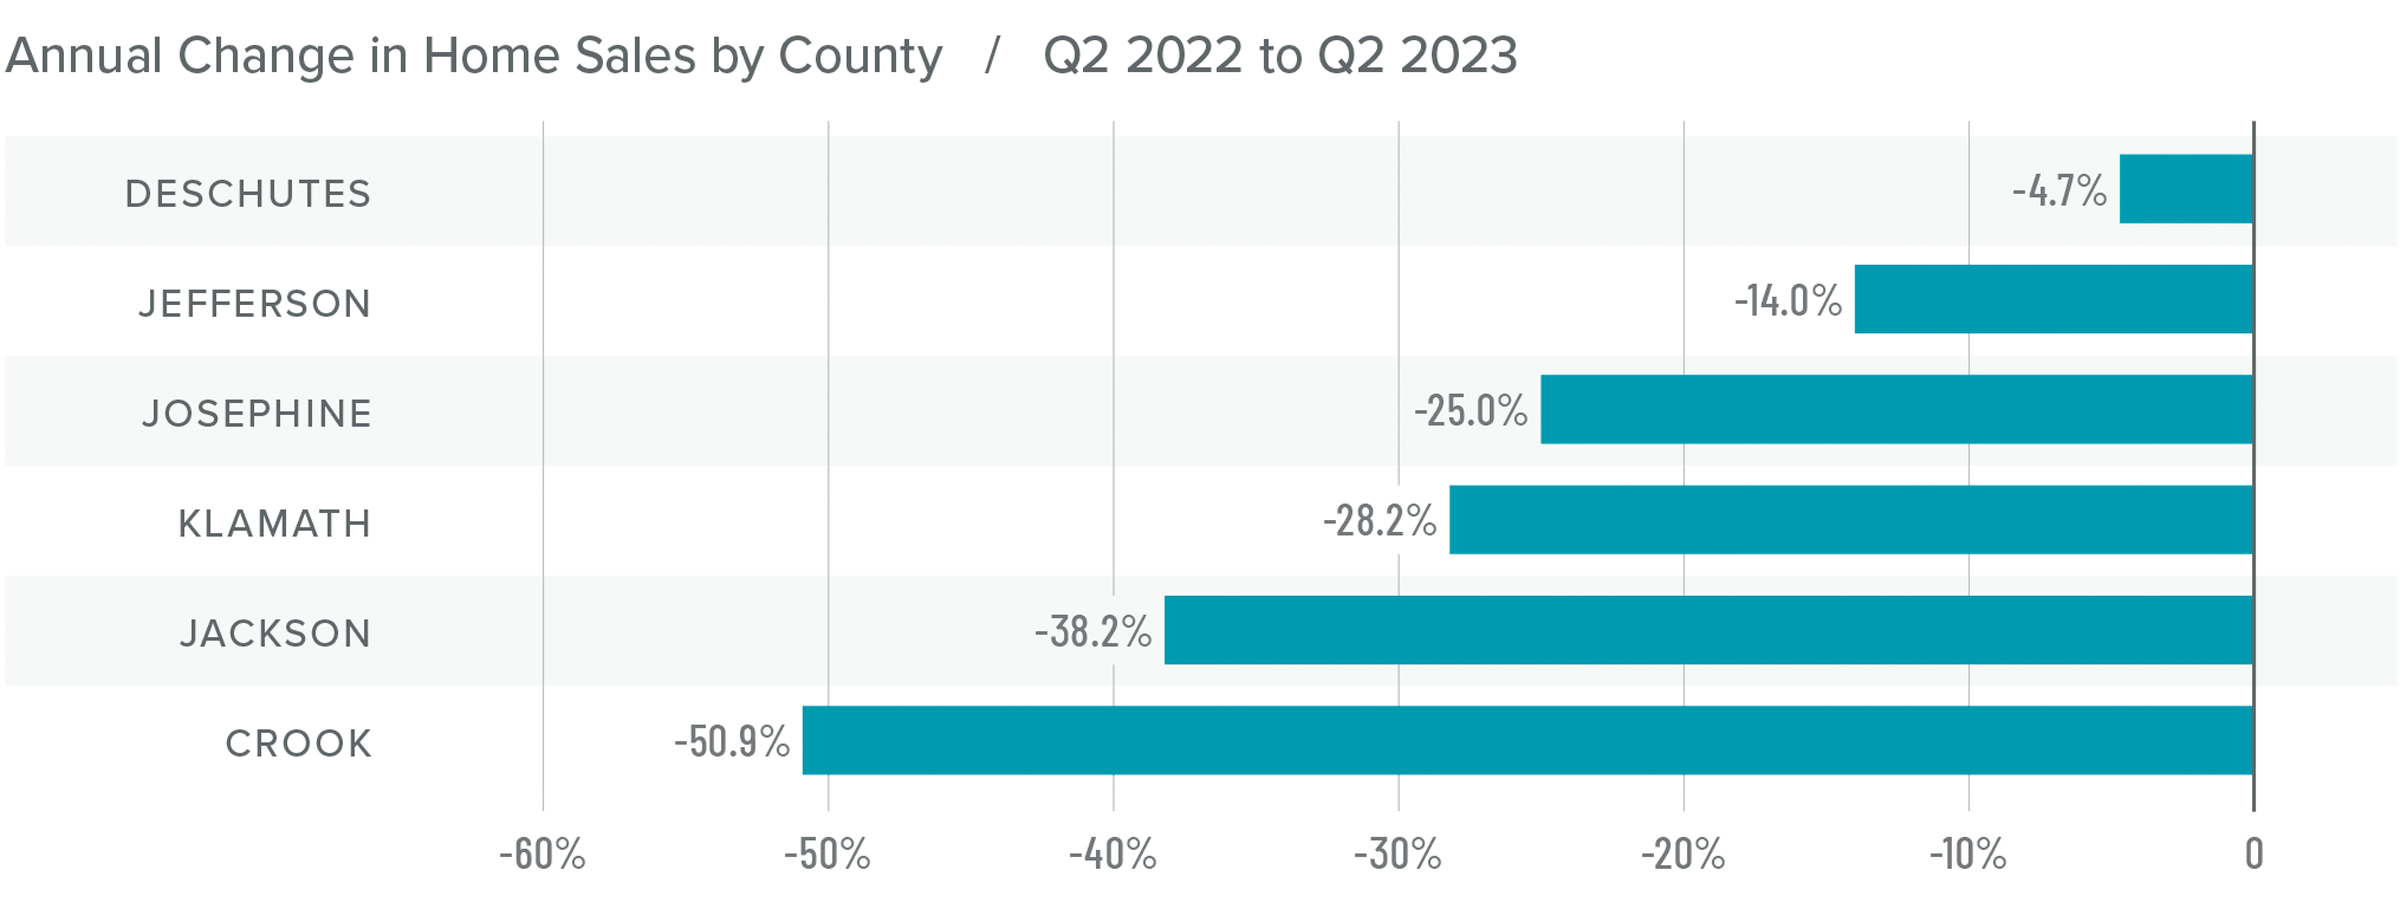 A graph showing the annual change in home sales by county for Central and Southern Oregon from Q2 2022 to Q2 2023. Deschutes had the least drastic change at -4.7%, while Crook had the most largest change at -50.9%.